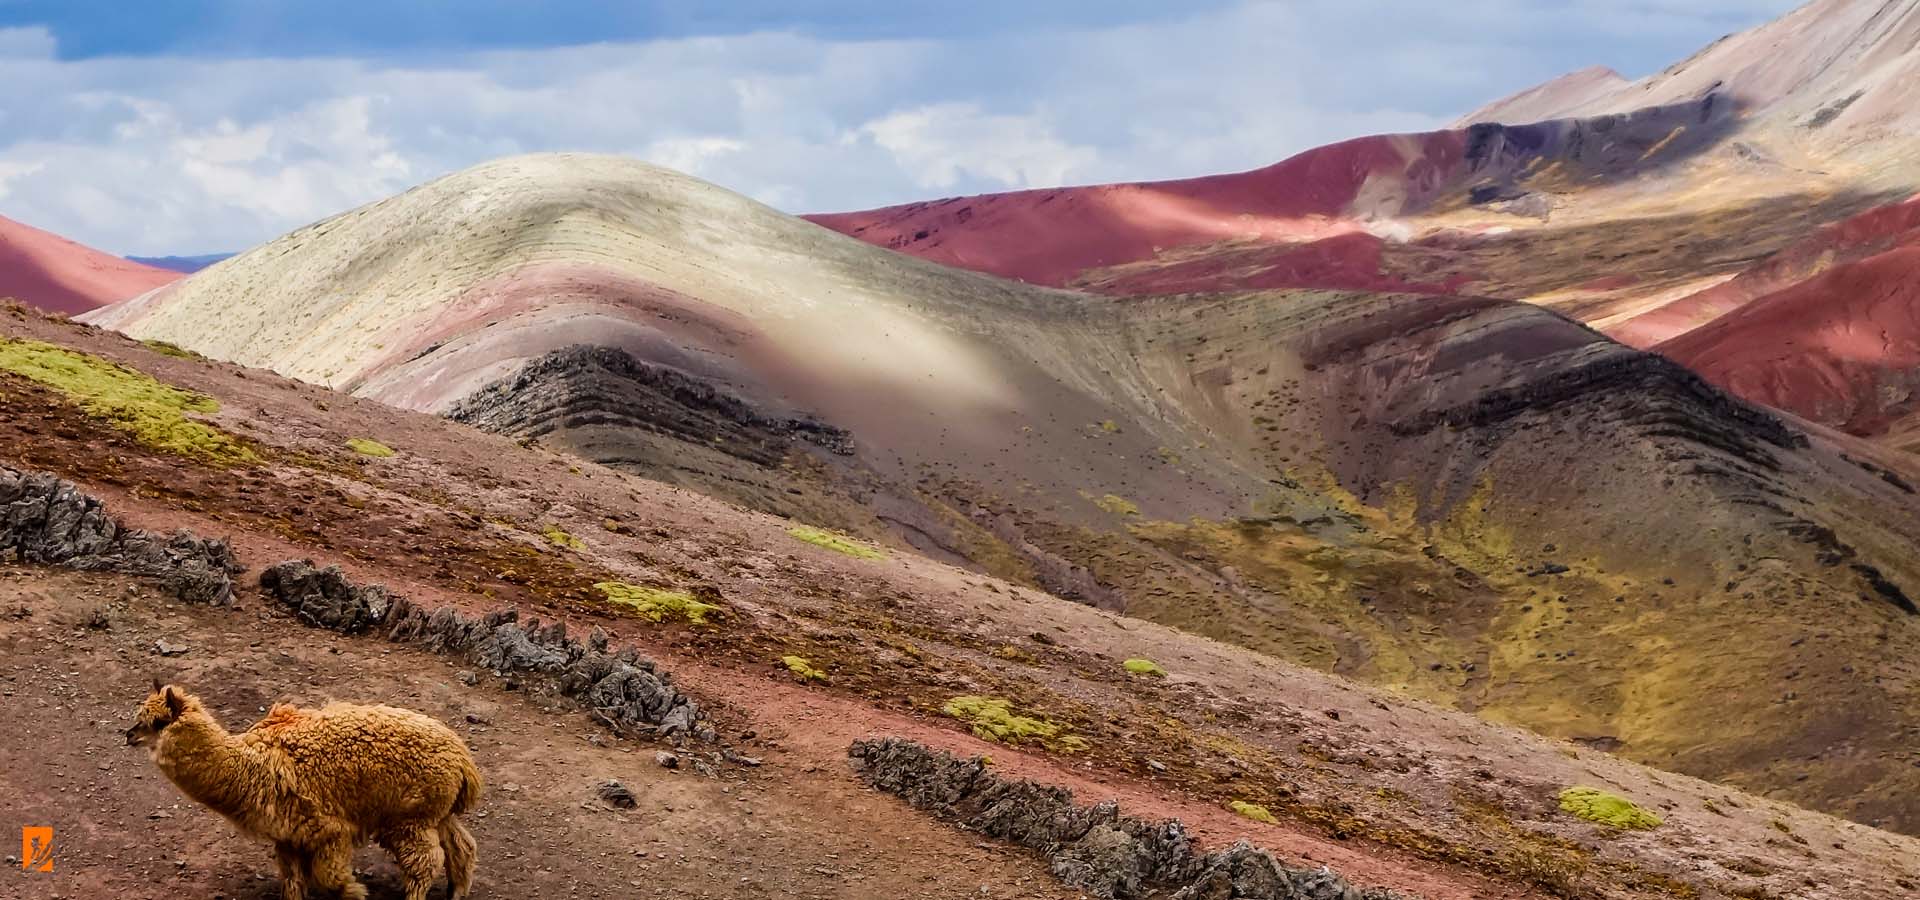 Exploring the Red Valley Peru | Facts & Information